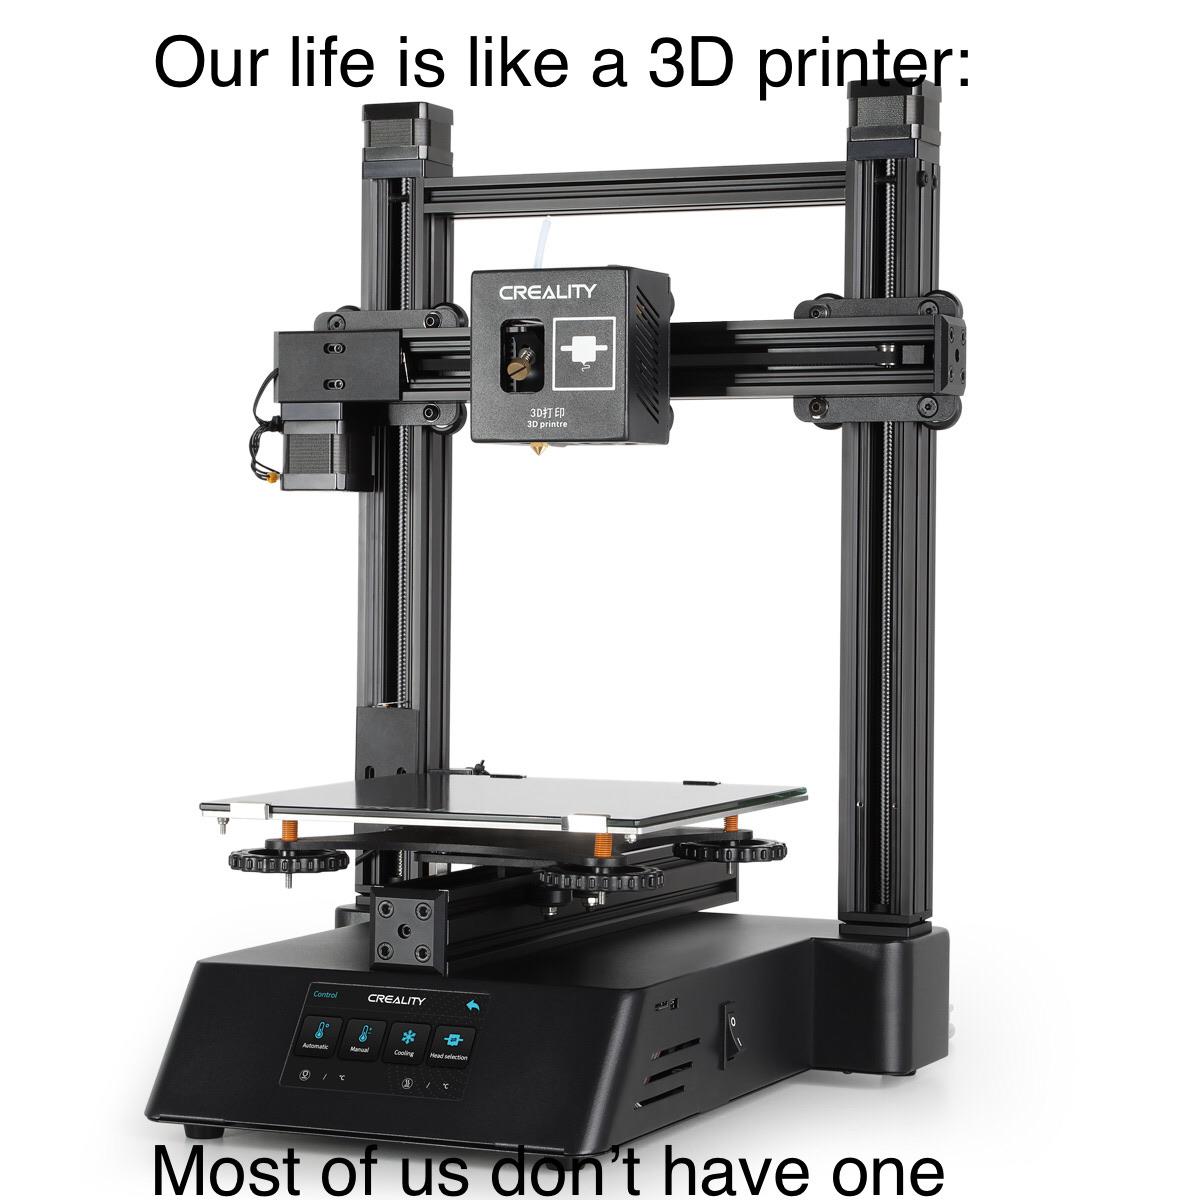 Funny, Ender, Printer, No, Christmas, CP other memes Funny, Ender, Printer, No, Christmas, CP text: Our life is like a 3D pri cREAL17Y 30 CREALmy Most o u t have one 